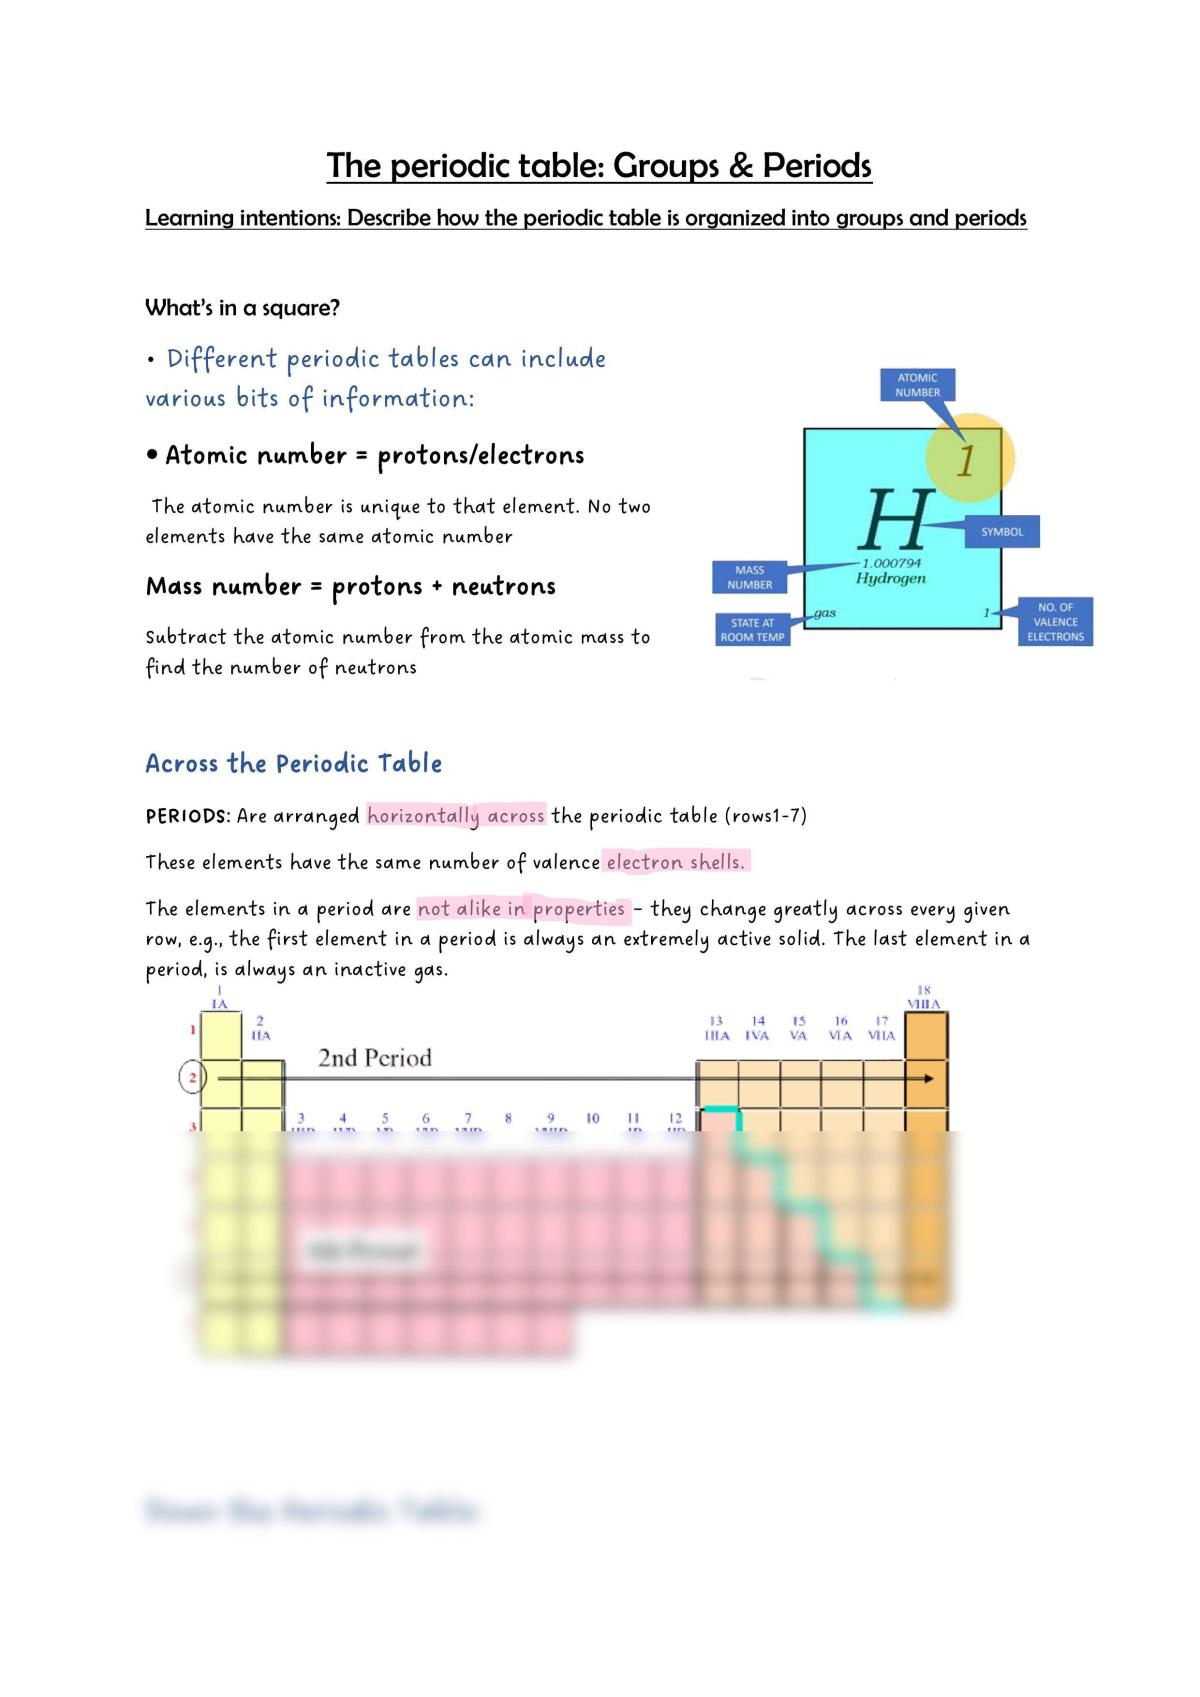 The Periodic Table: Groups and Periods  - Page 1